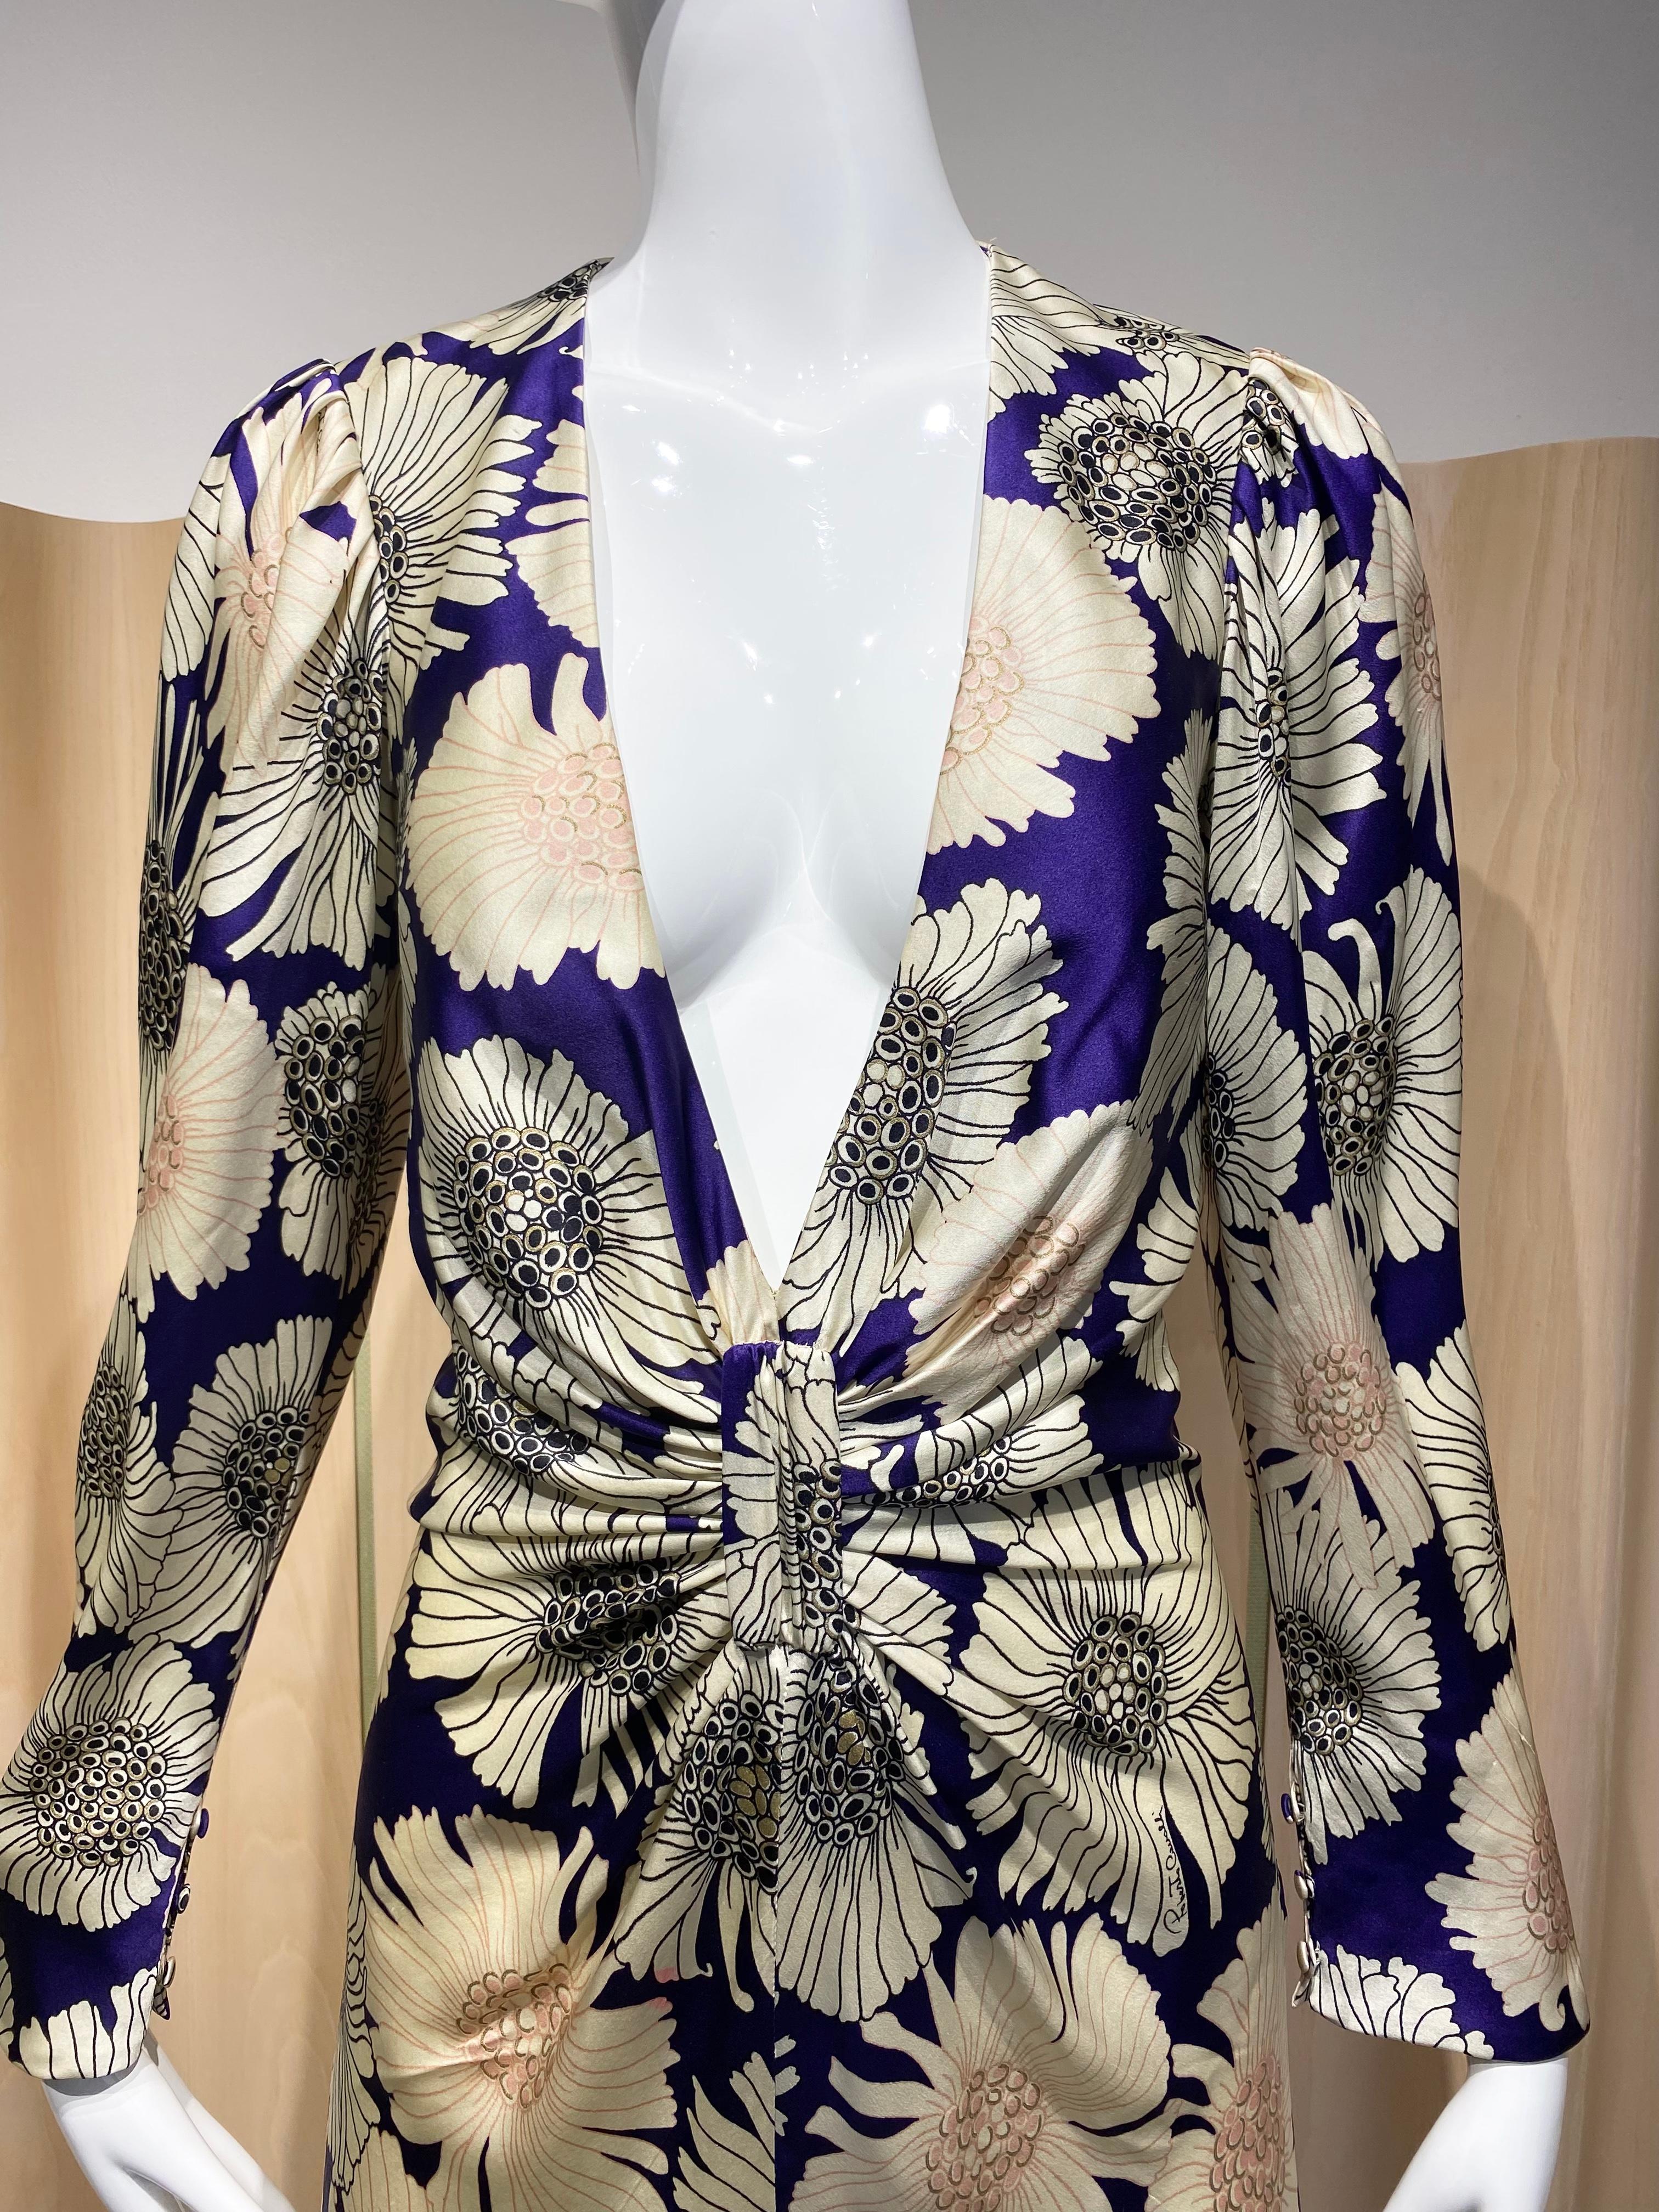 2000s Roberto Cavalli cream, purple ,pale pink and metallic gold  Silk Charmeuse  chrysanthemum flower print. V neck  long sleeve cocktail dress.  Perfect for engagement party or rehearsal dinner.
ruching waist
Deep V neck
Marked size 40 but fit